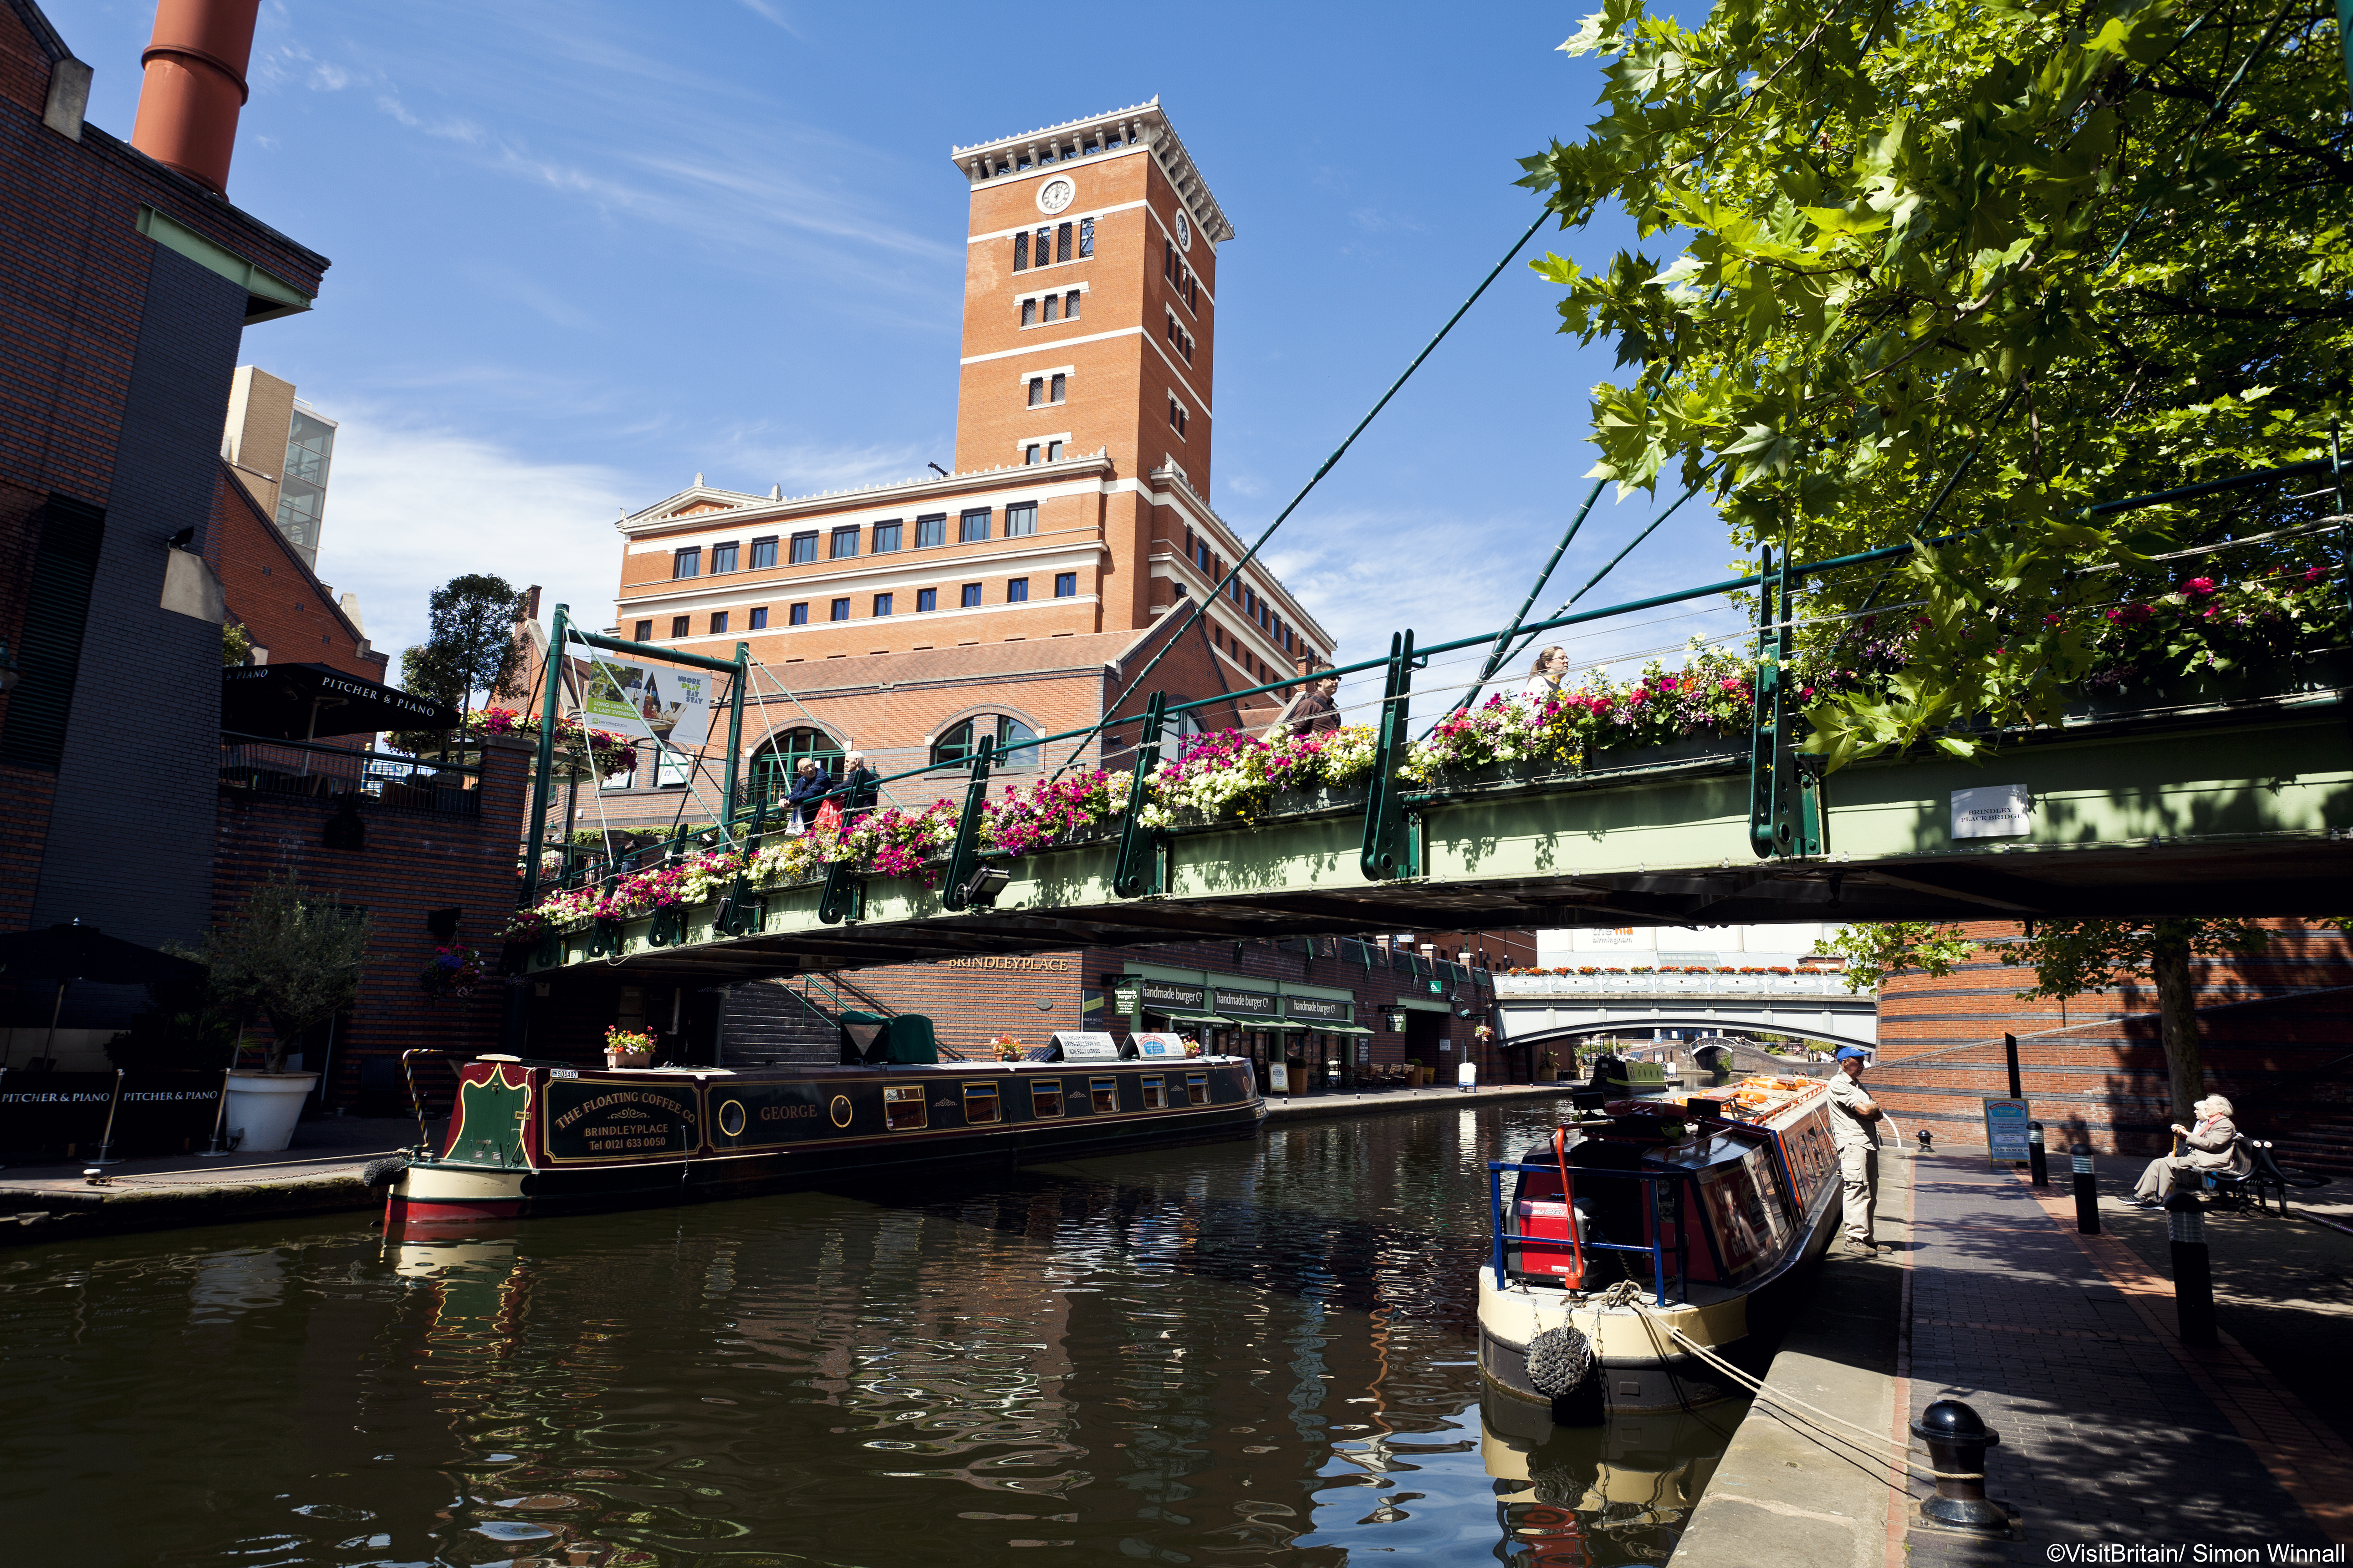 A view of Brindley Place in Birmingham during the summer.